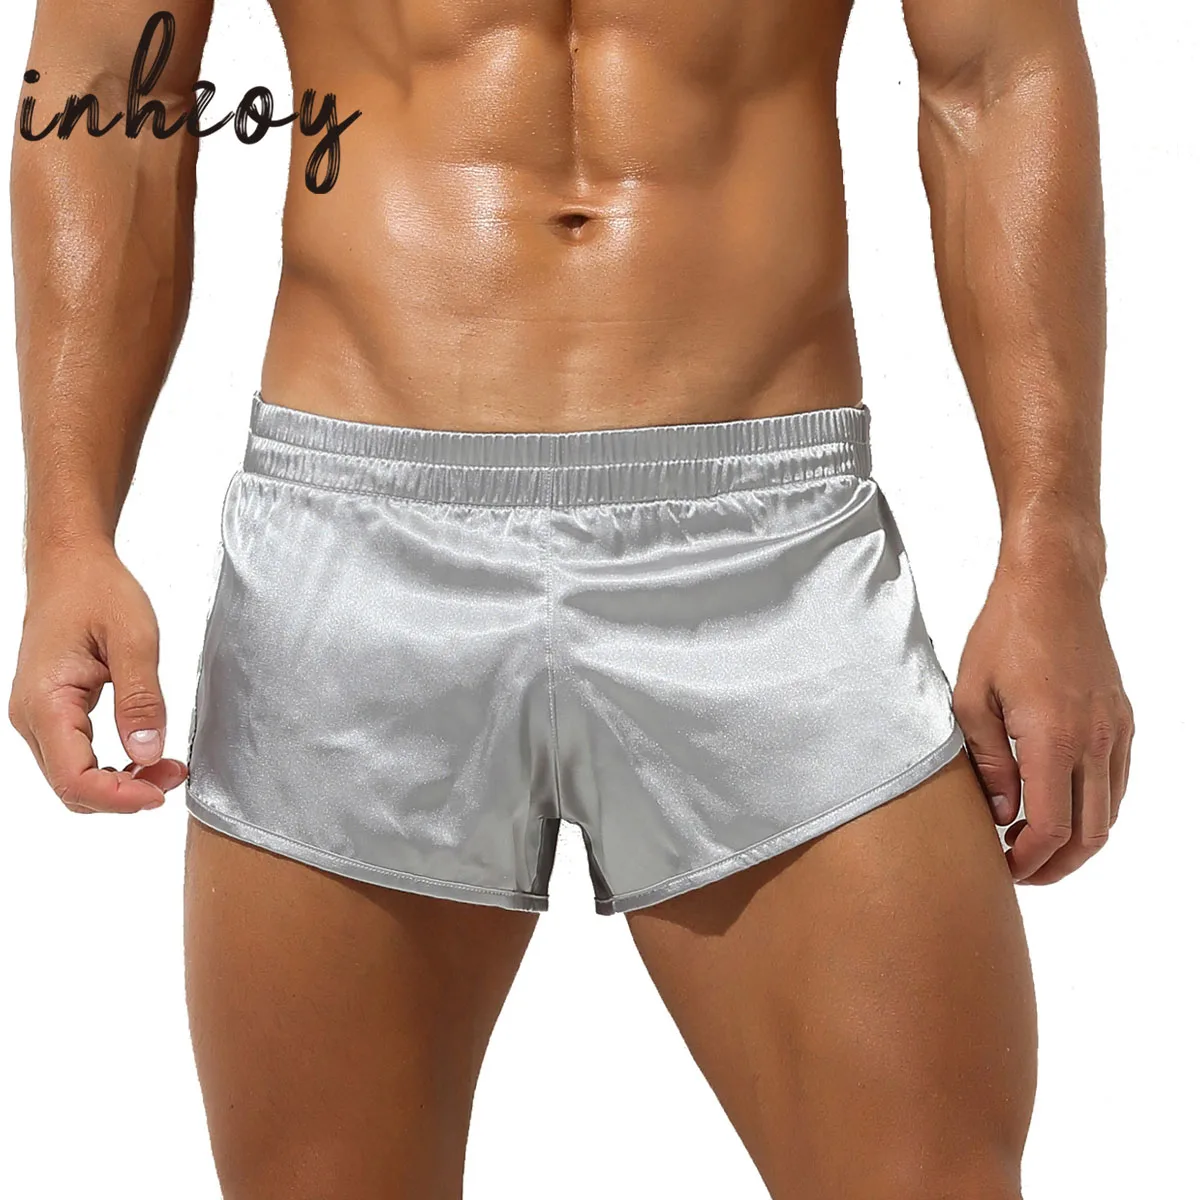 Mens Silky Satin Boxers Shorts Soft Underwear Sports Panties Casual Loose Trunks 